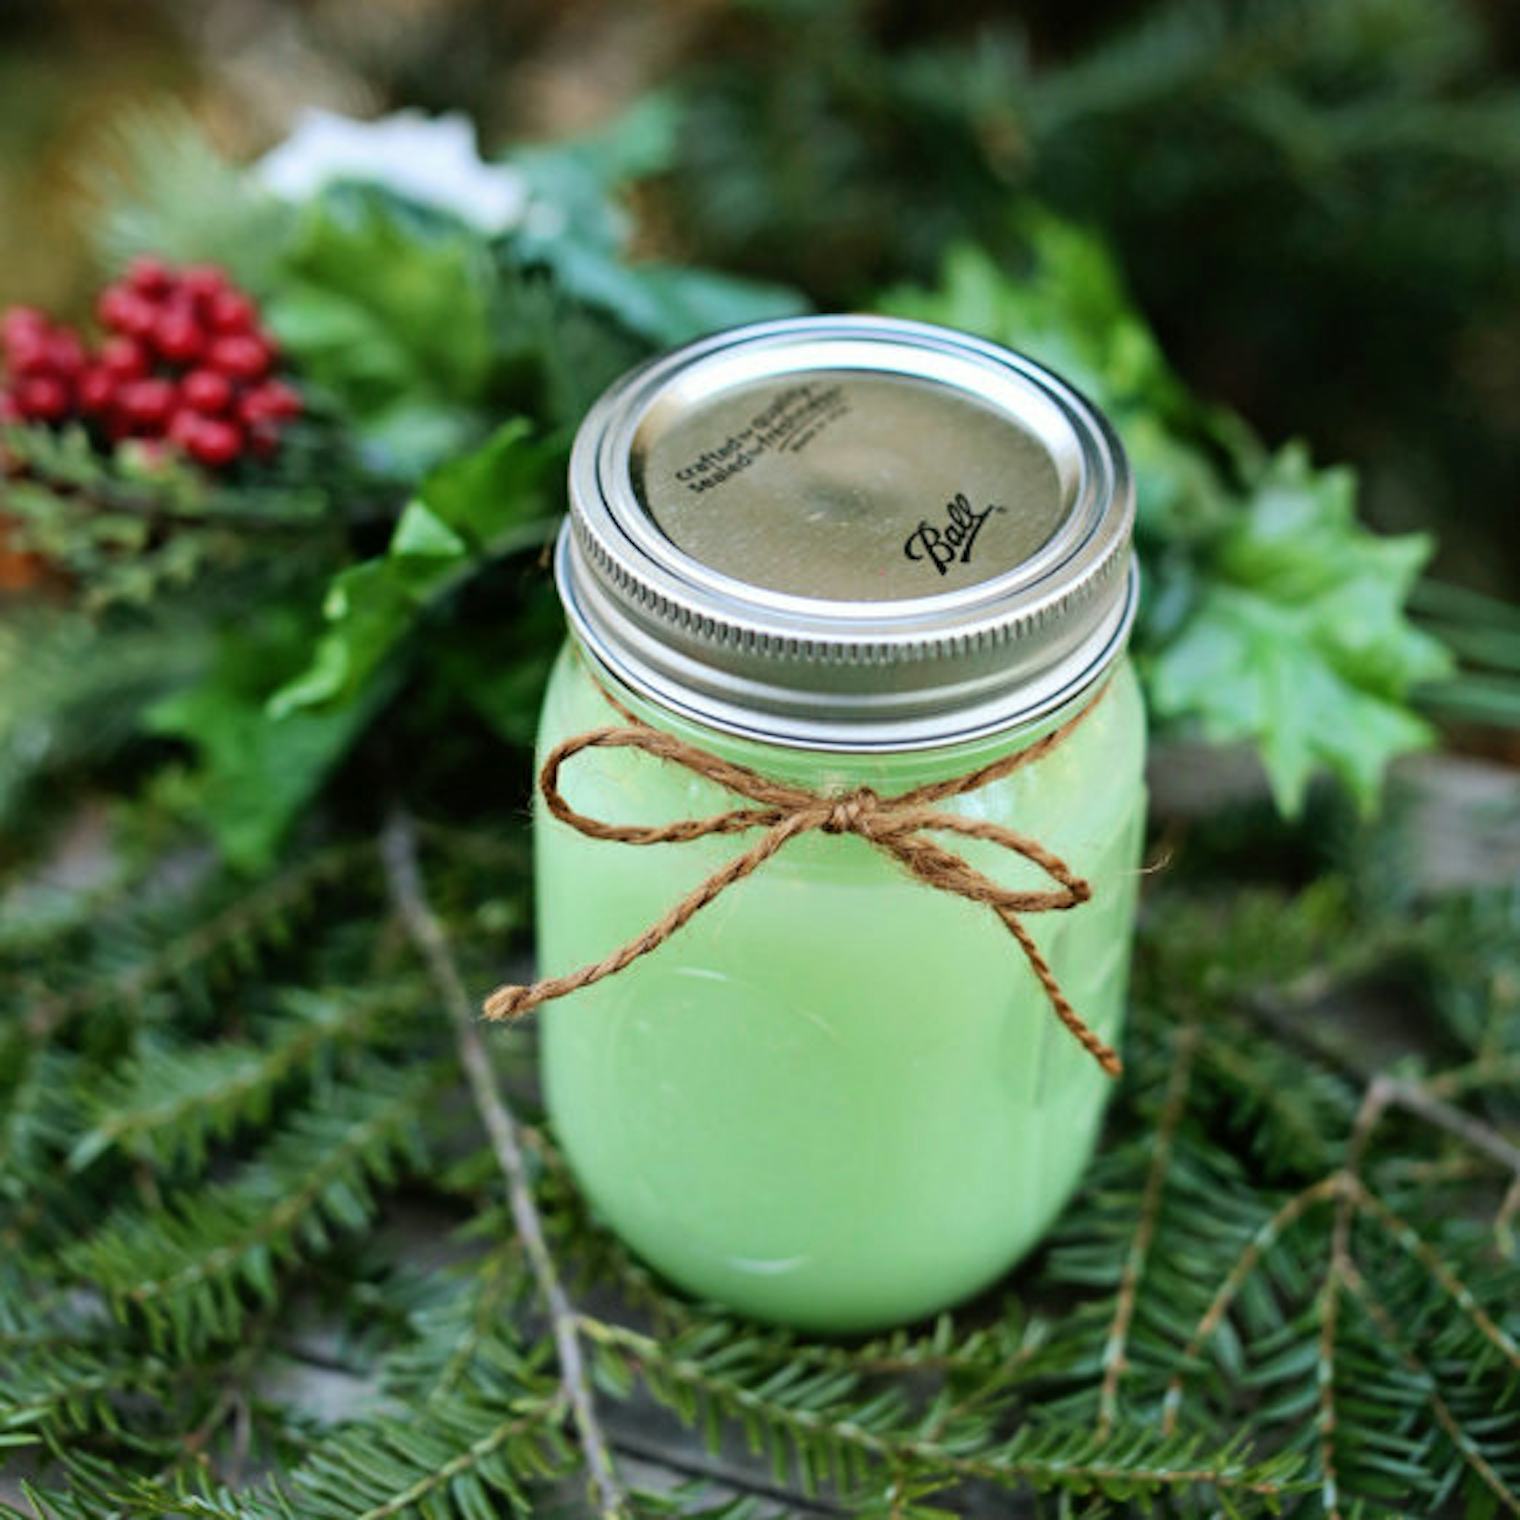 12 Holiday Candles With Unusual Scents That You’ll Love